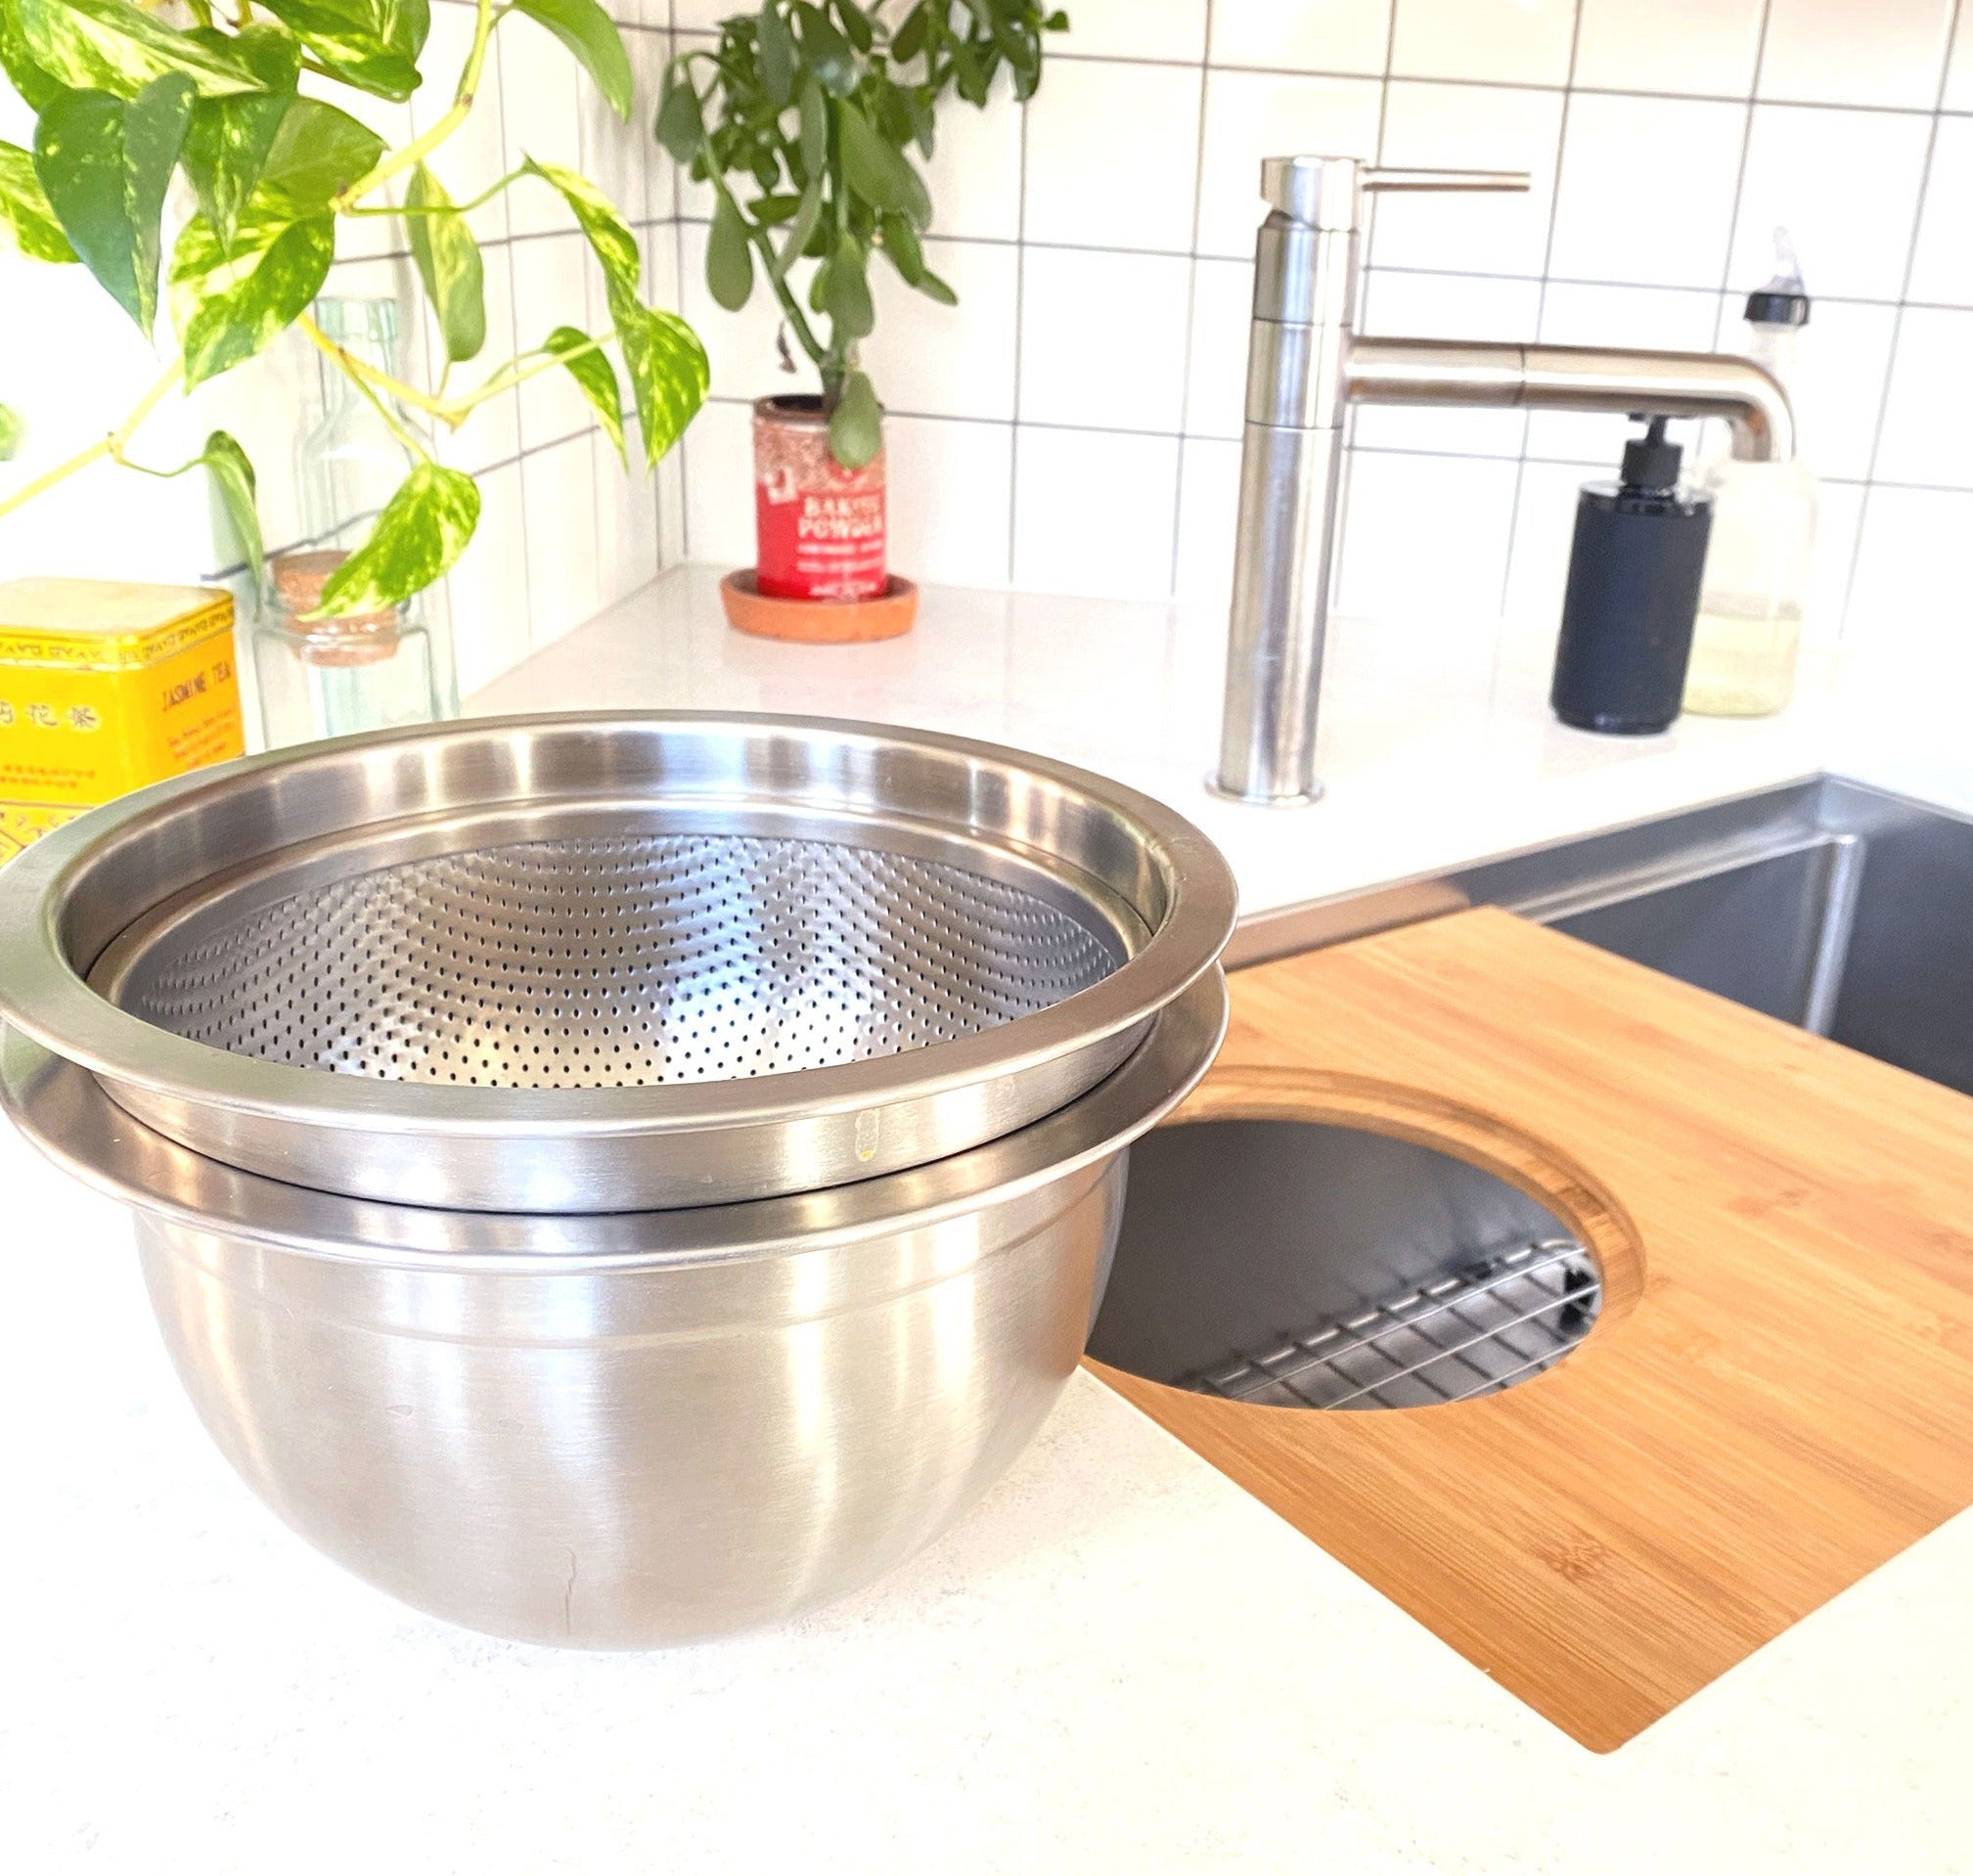 Products Workstation Sink Accessory - 18" Bamboo Cutting Board with 11" Stainless Steel Colander and Mixing Bowl